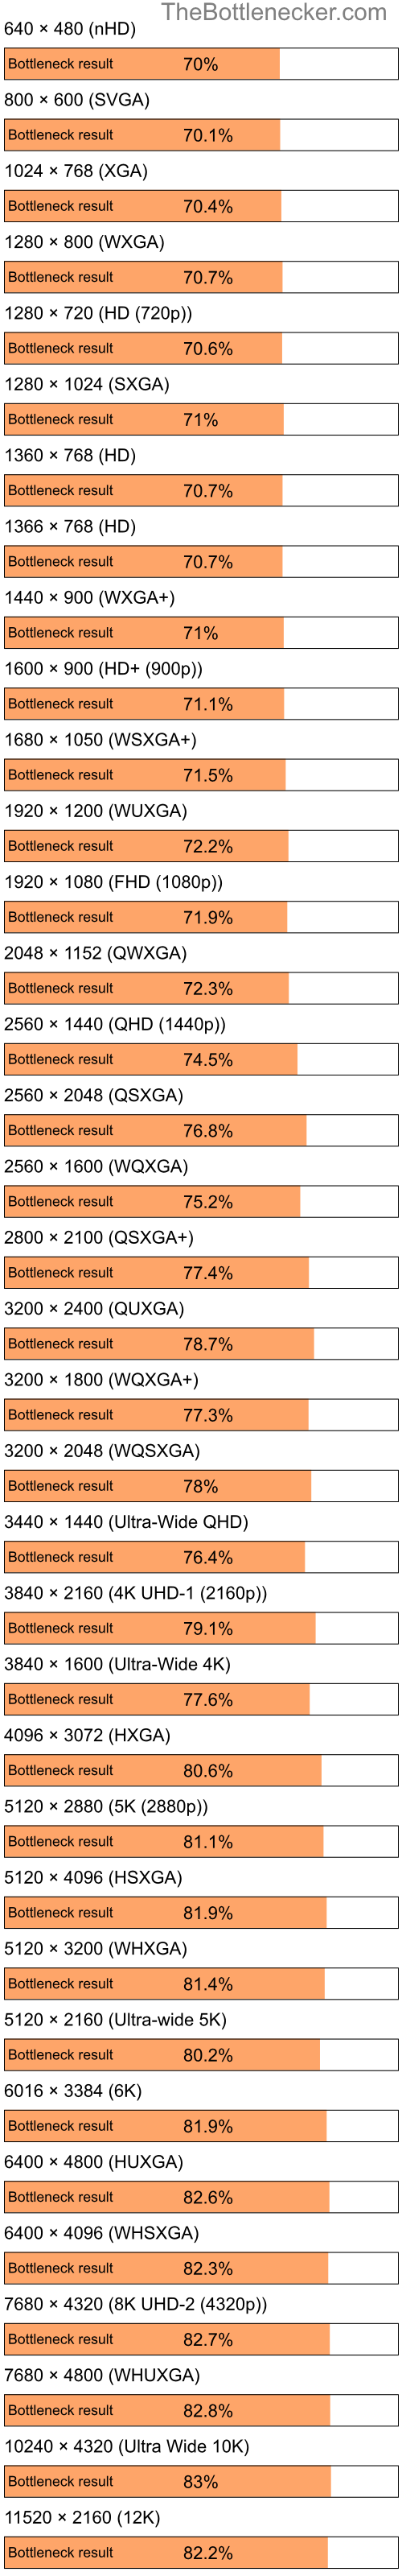 Bottleneck results by resolution for Intel Celeron M 420 and NVIDIA GeForce G210 in Graphic Card Intense Tasks